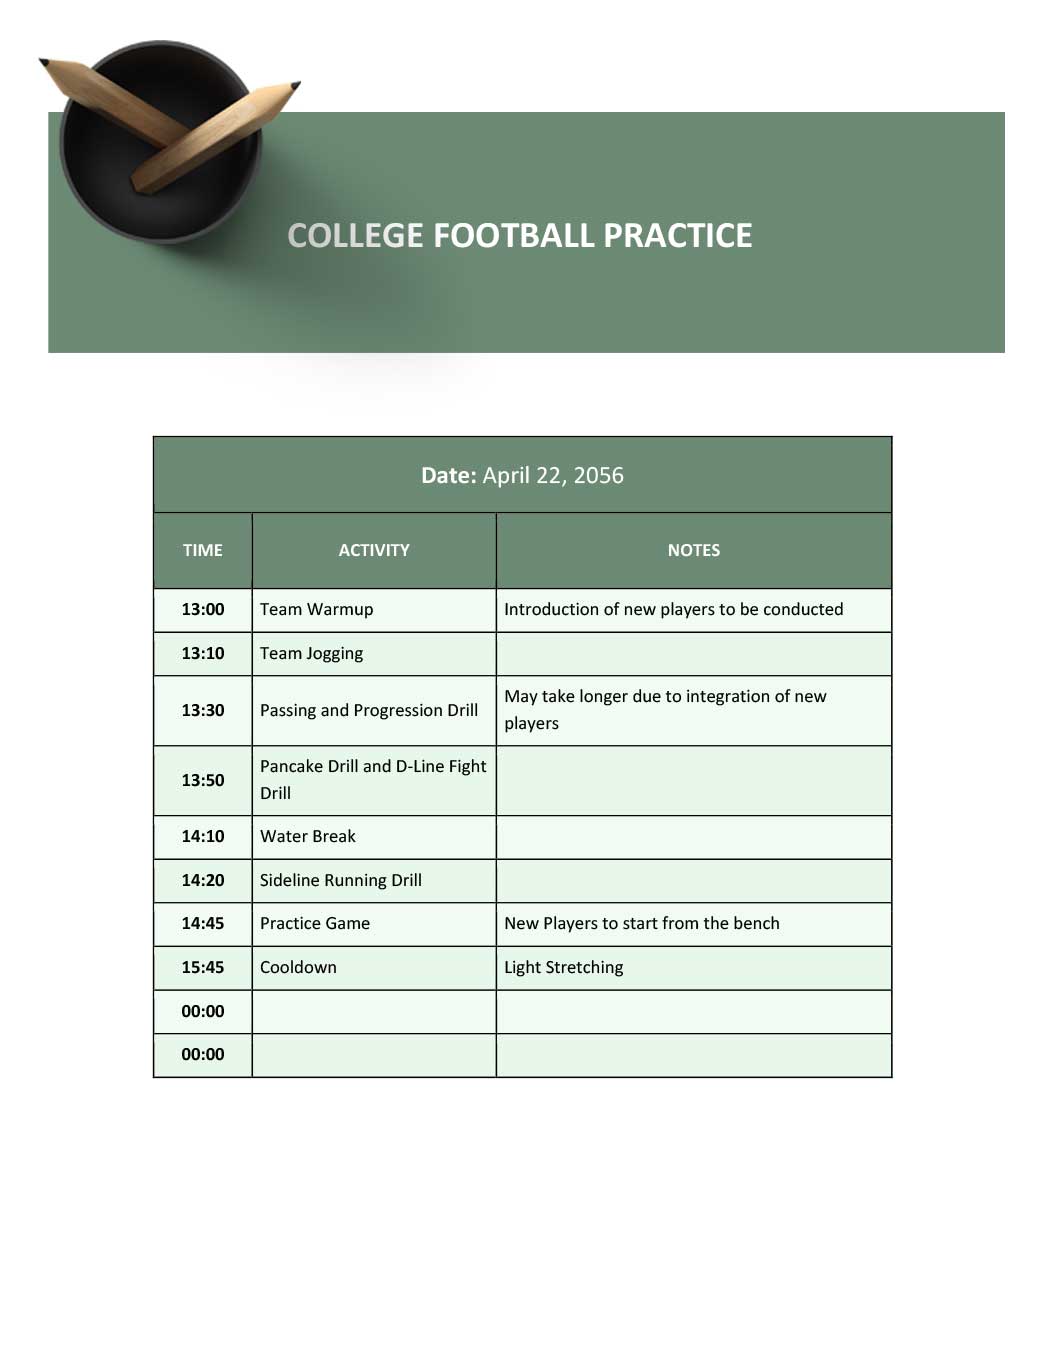 Free College Football Practice Schedule Template Download in Word